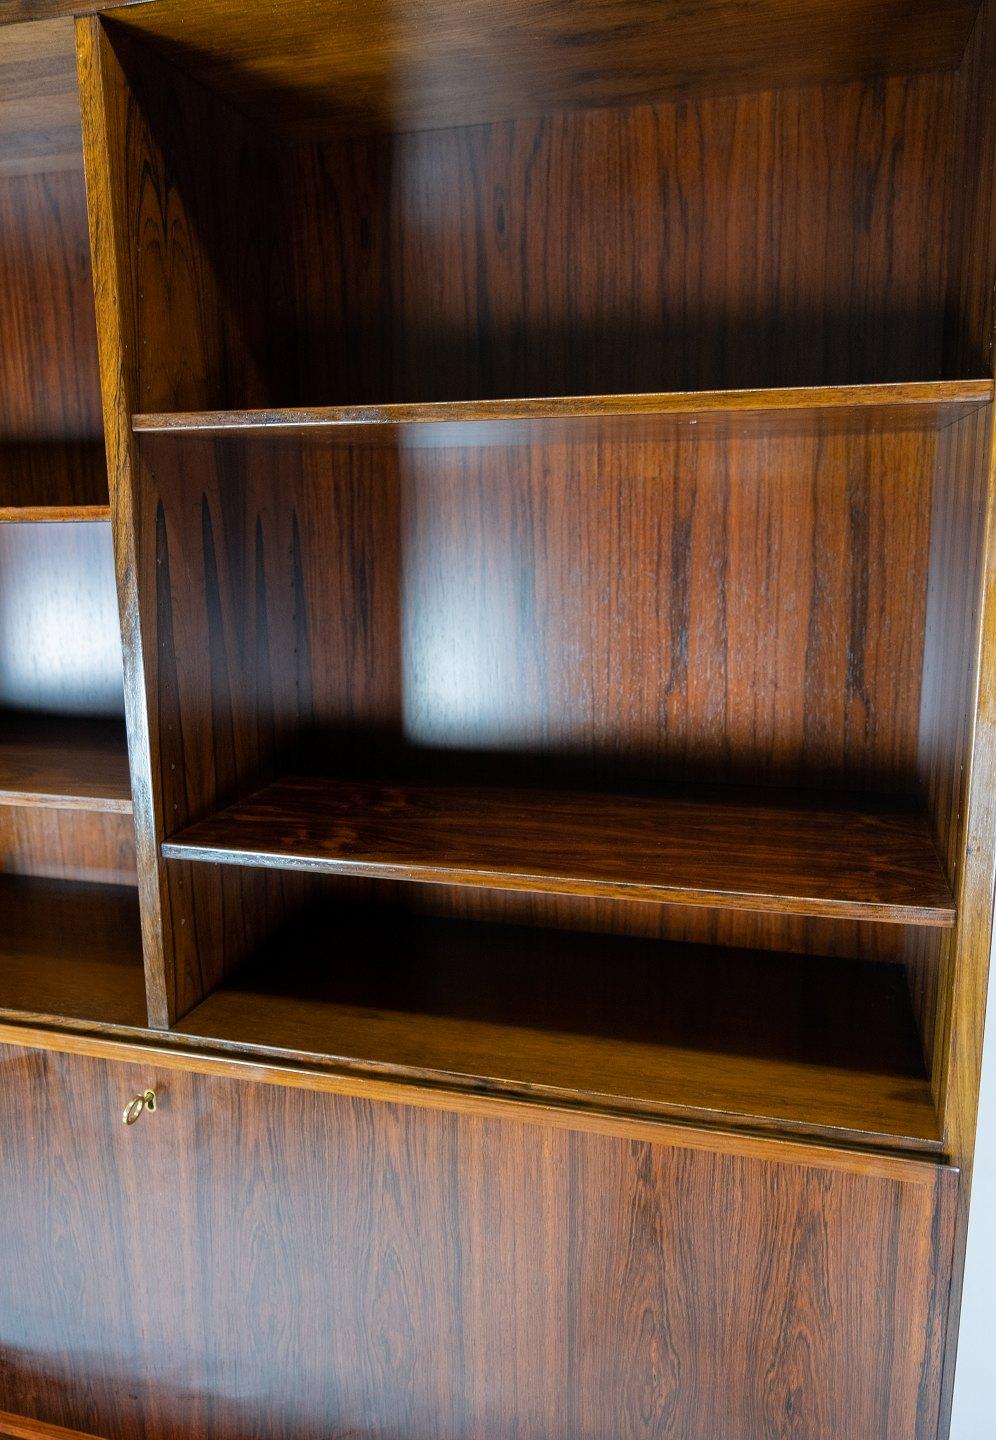 Get an authentic piece of Danish furniture history with this beautiful bookcase with secretary in rosewood, model no. 9, designed by Omann Junior in the 1960s. This bookcase is an excellent example of the timeless elegance and fine craftsmanship